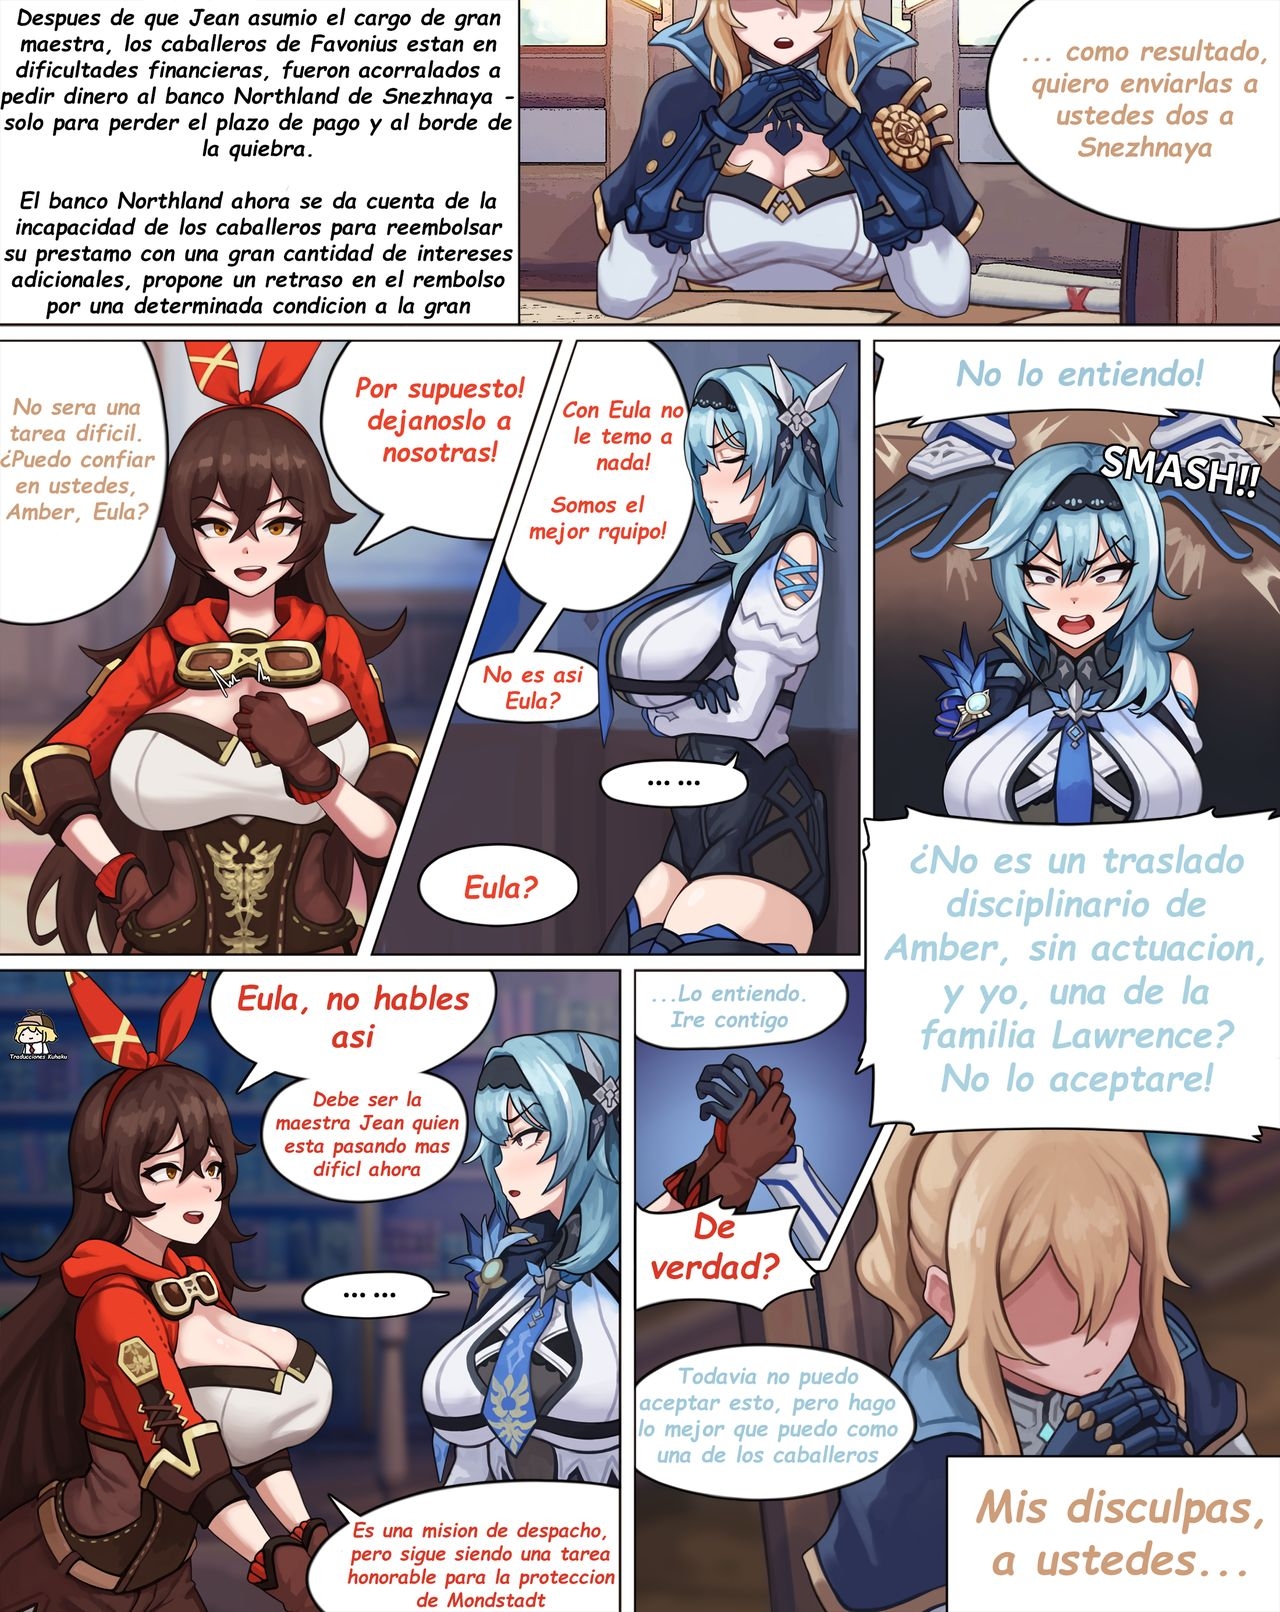 [PoPer] Sexual Service Mission of Knights of Favonius (Part 1) 1